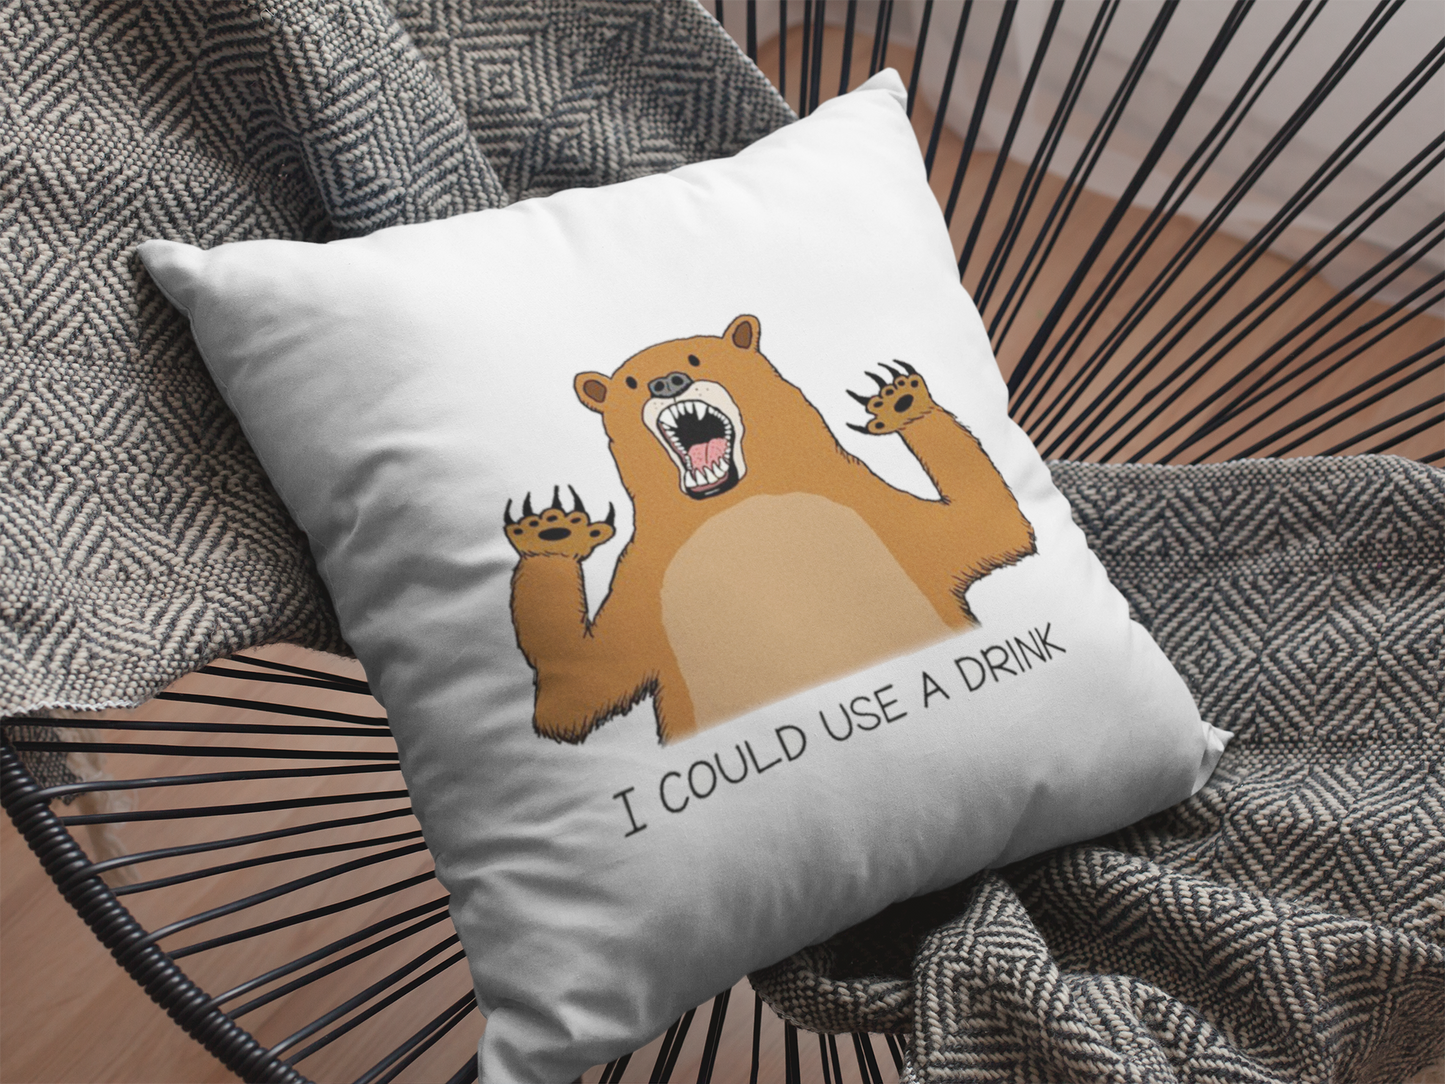 I Could Use A Drink Printed Cushion